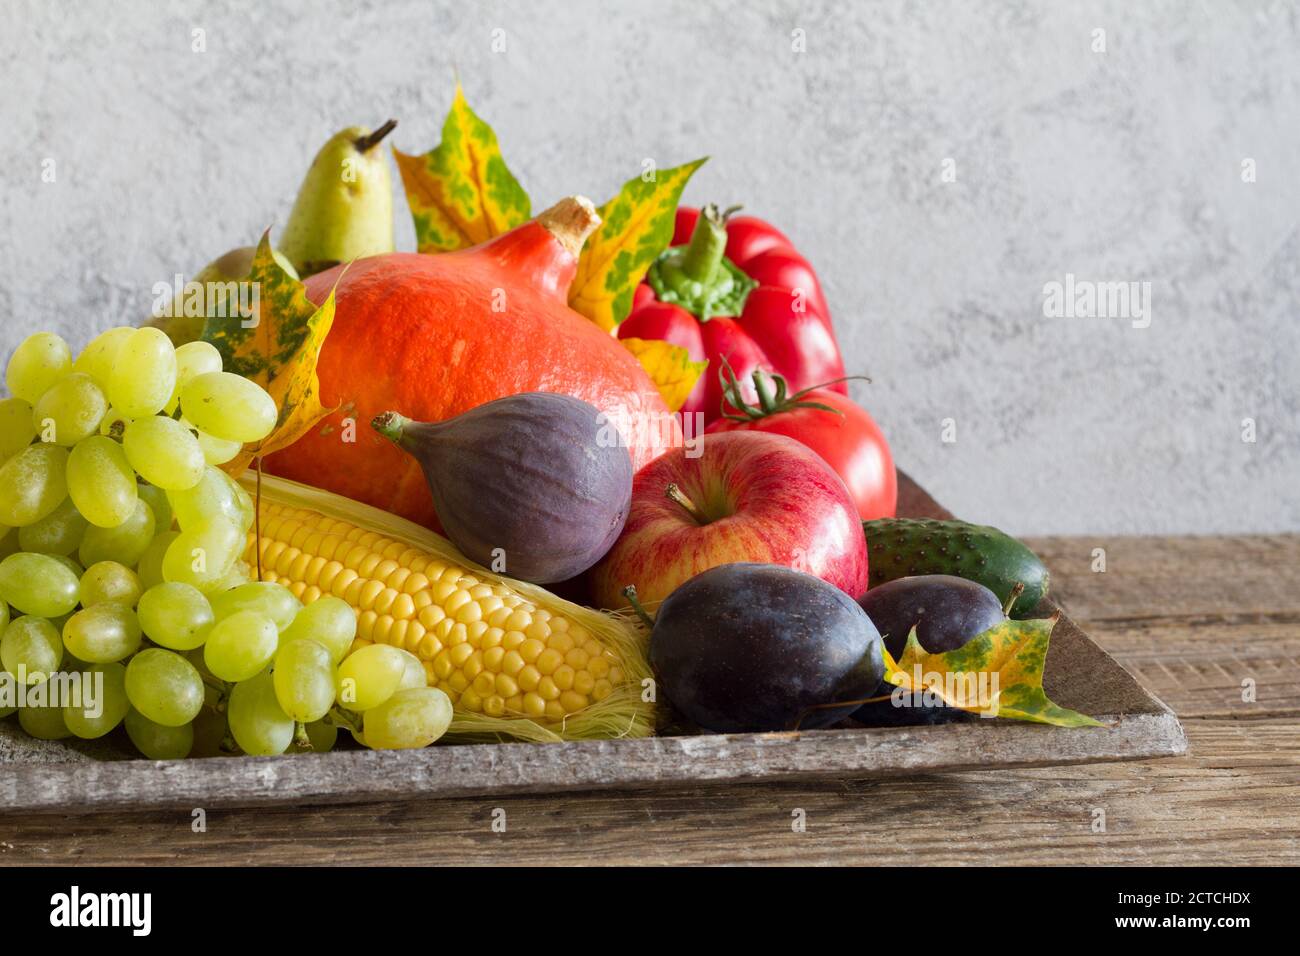 Autumn fruits and vegetables on grey background Stock Photo